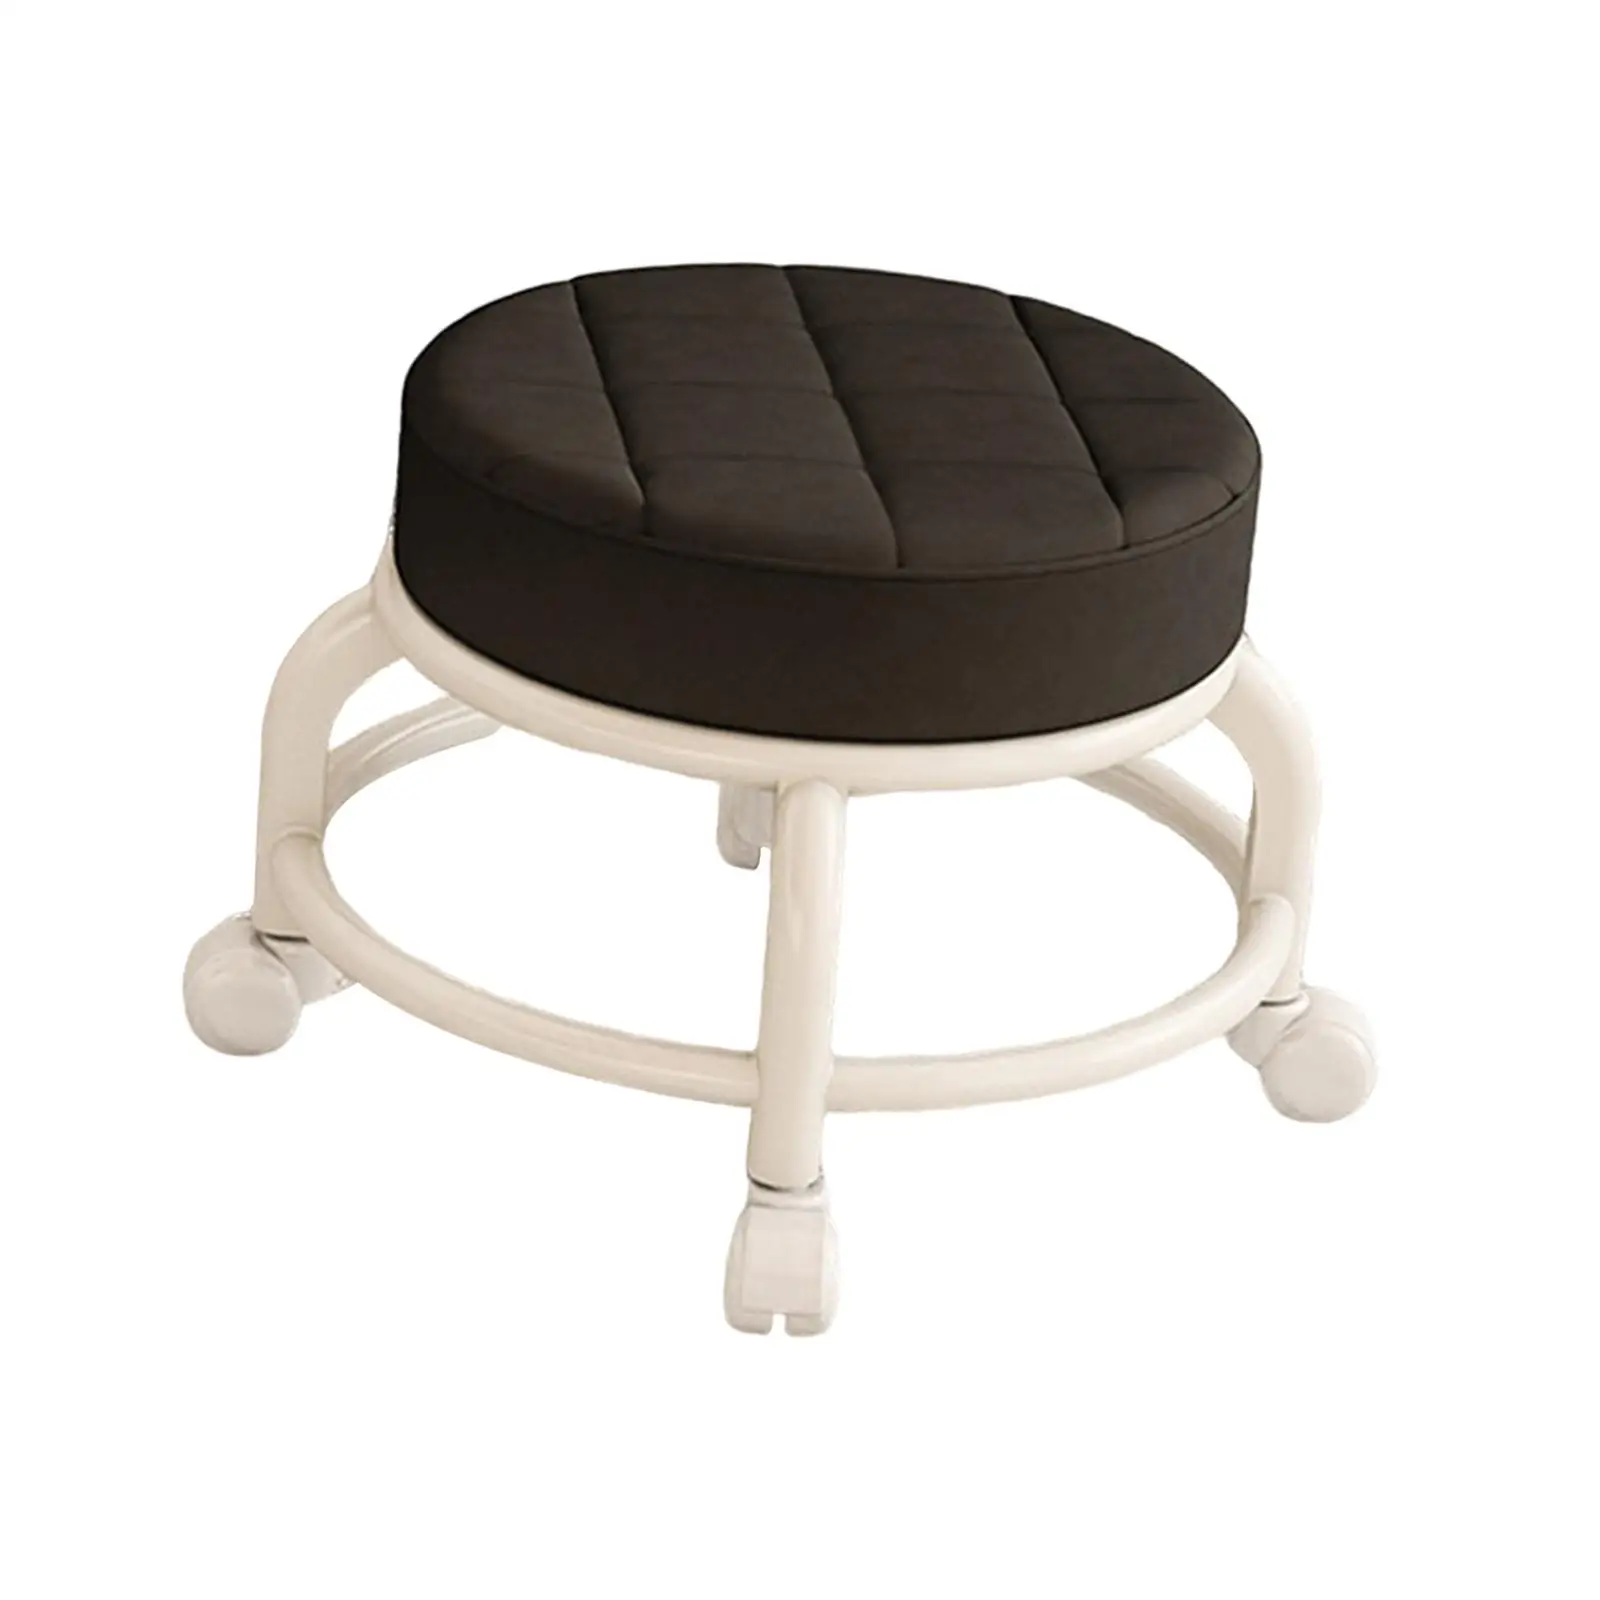 Low Round Roller Seat Stool PU Leather Seat Padded Portable Heavy Duty 360° Rotating Rolling Stool Pedicure Stool for Garage